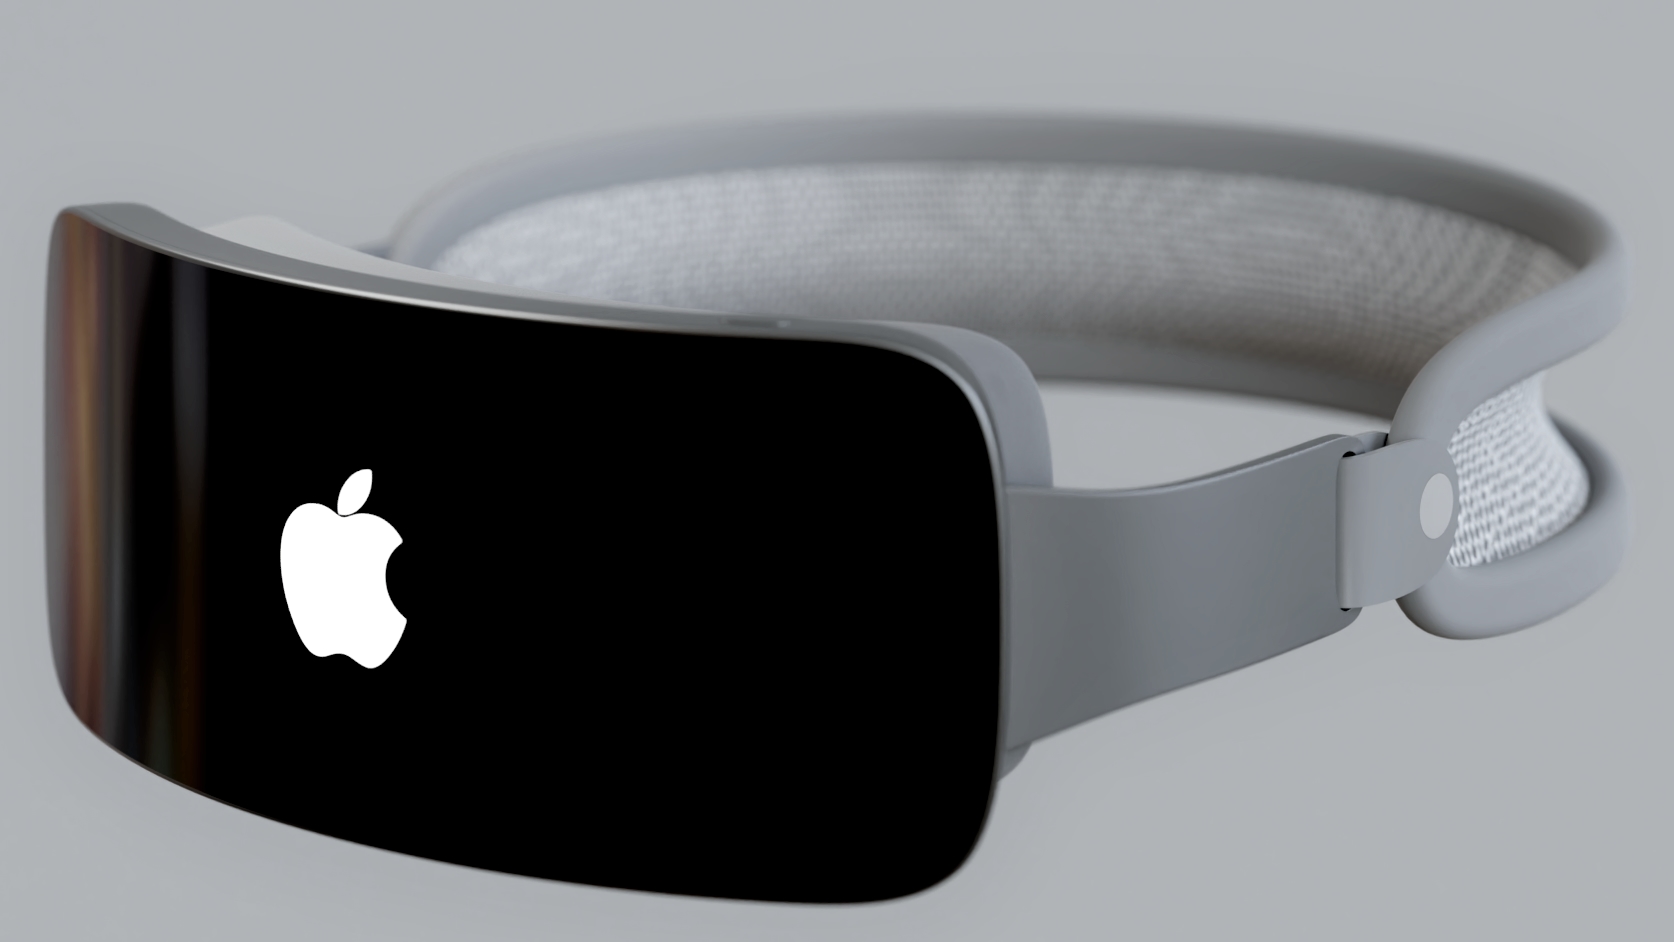 Apple’s boss is evangelizing AR and VR ahead of the rumored headset reveal